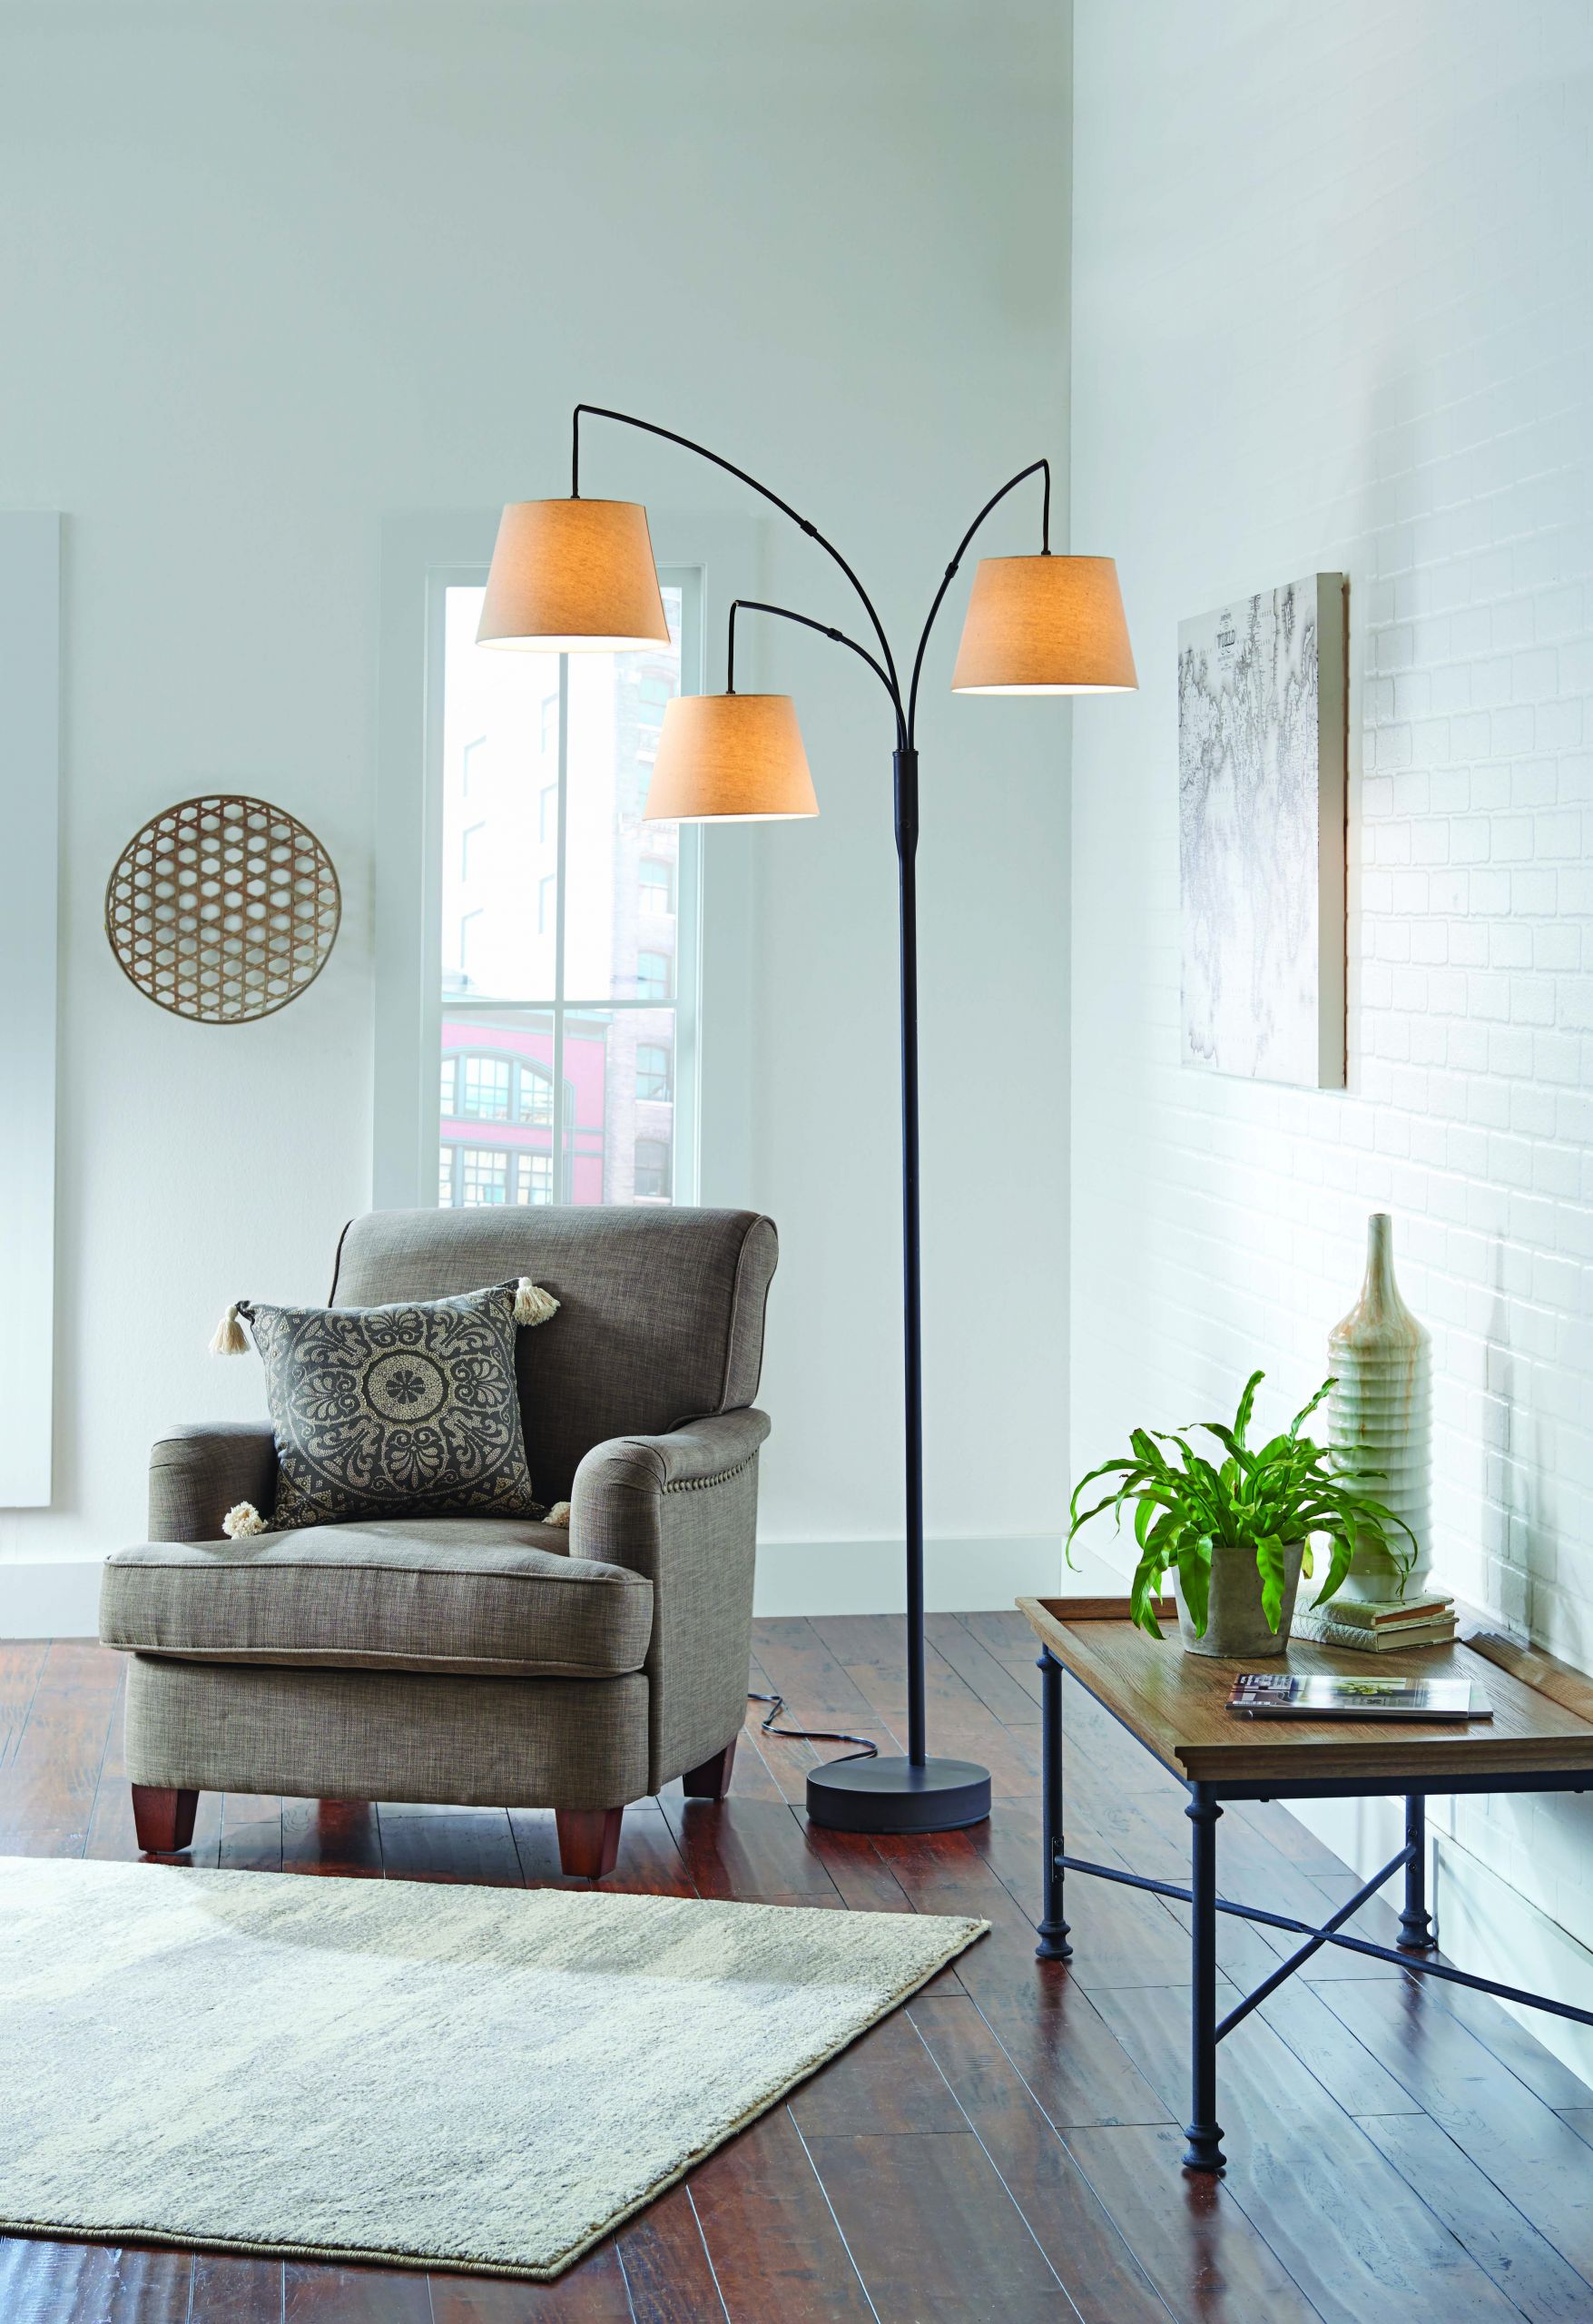 Living Room Arc Floor Lamps
 Arc Floor Lamp Ideas For Your Home